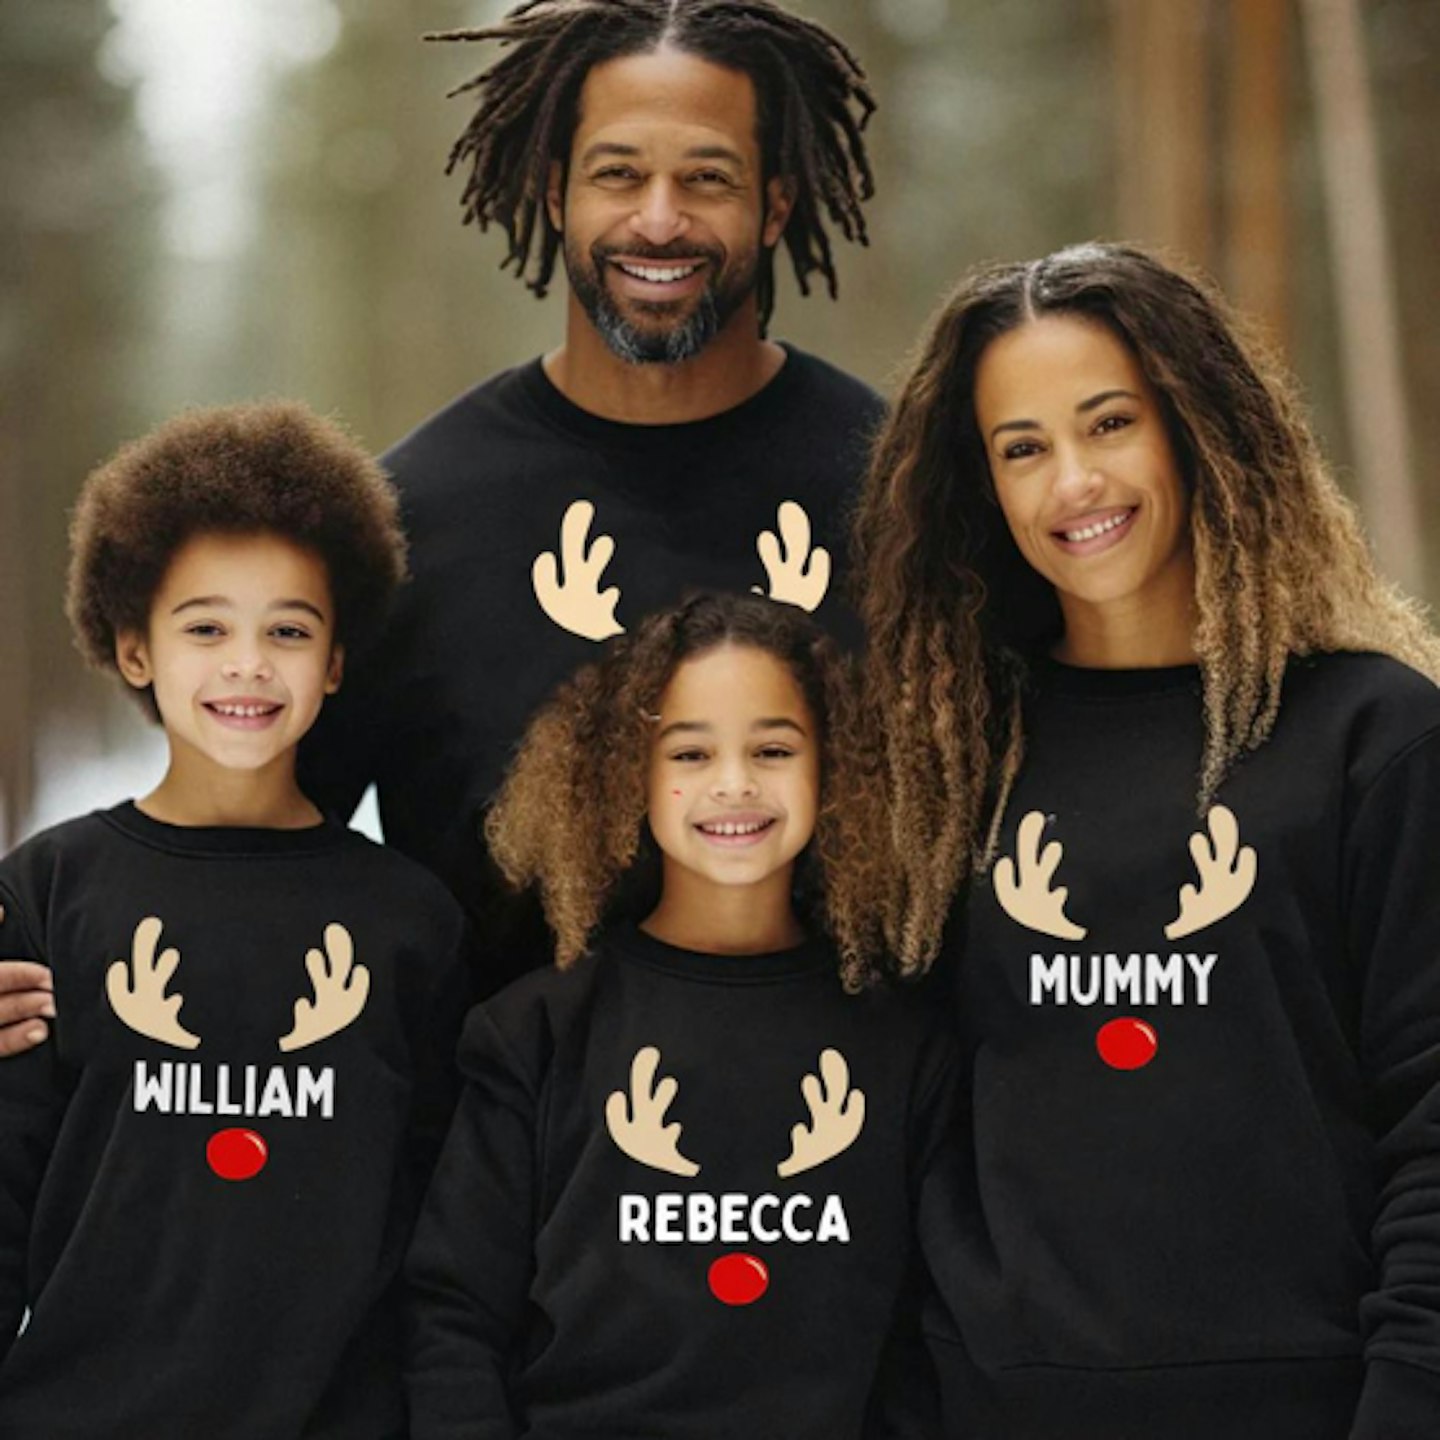 Christmas jumpers for the family matching